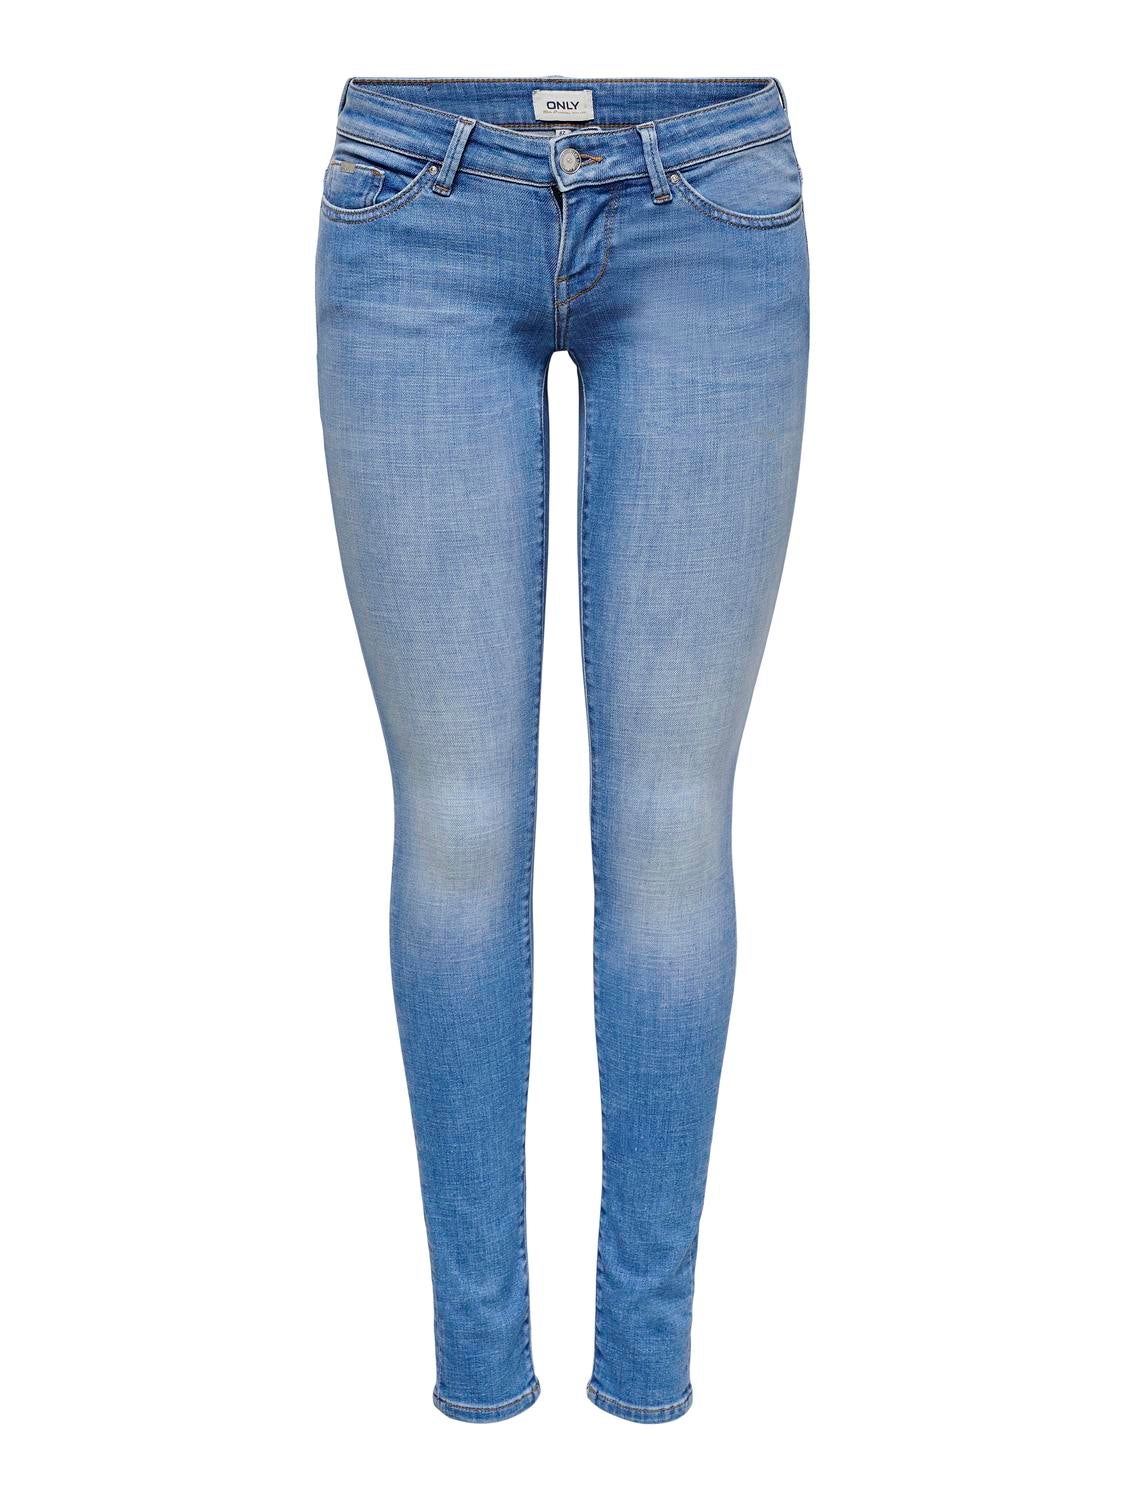 Mode Spijkerbroeken Low Rise jeans only blue denim Low Rise jeans blauw casual uitstraling 